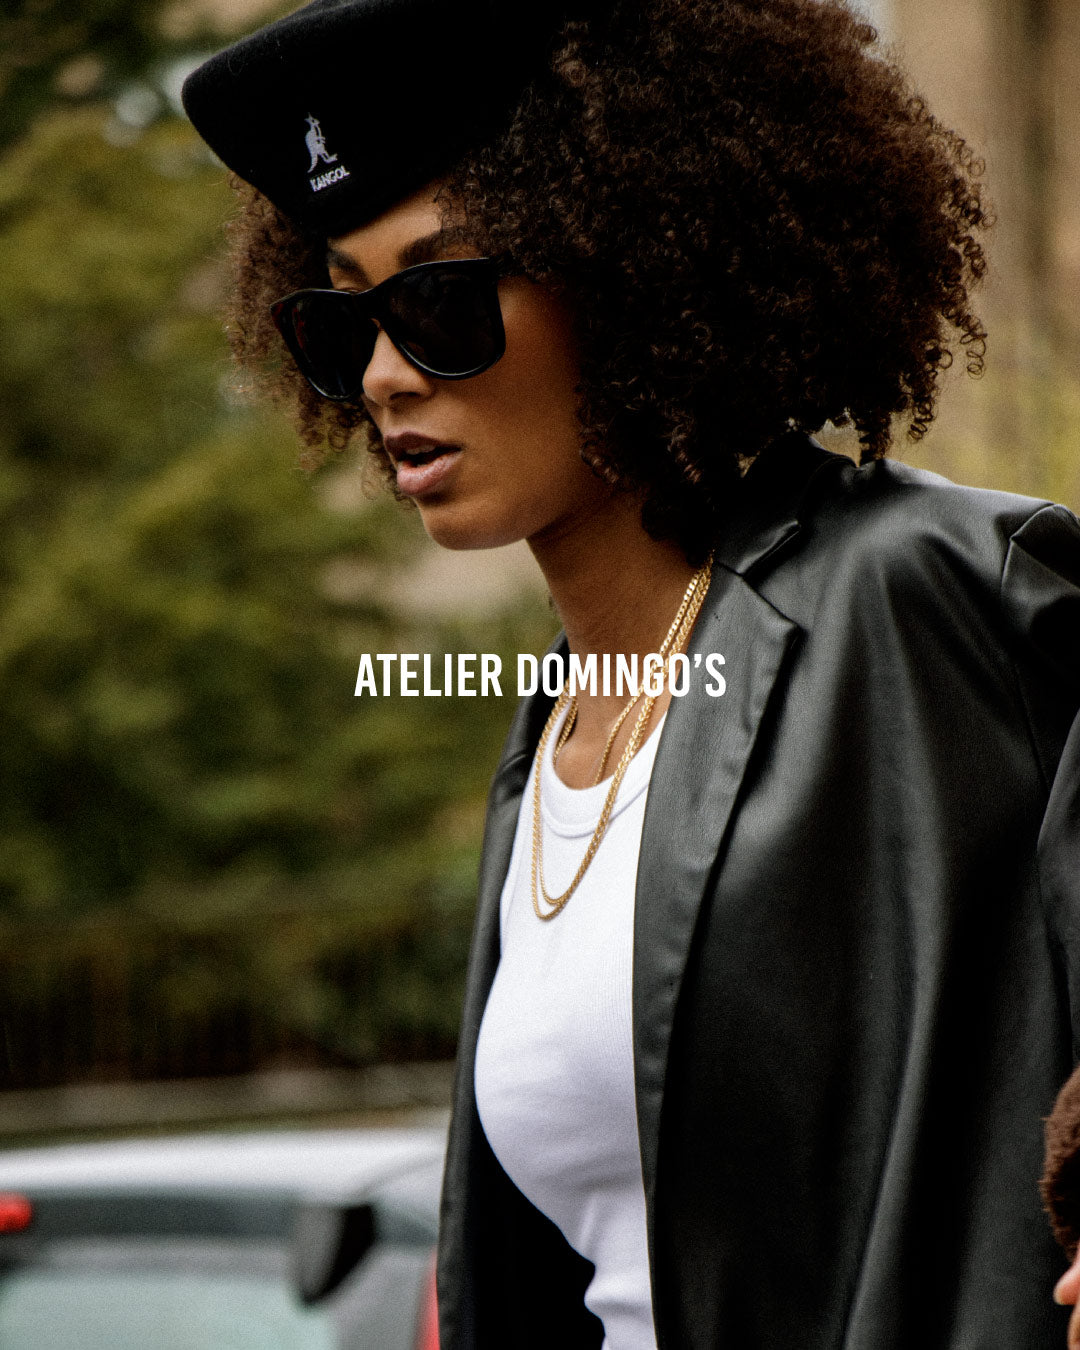 The Chain Collection - Unisex necklaces and bracelets by Atelier Domingo's